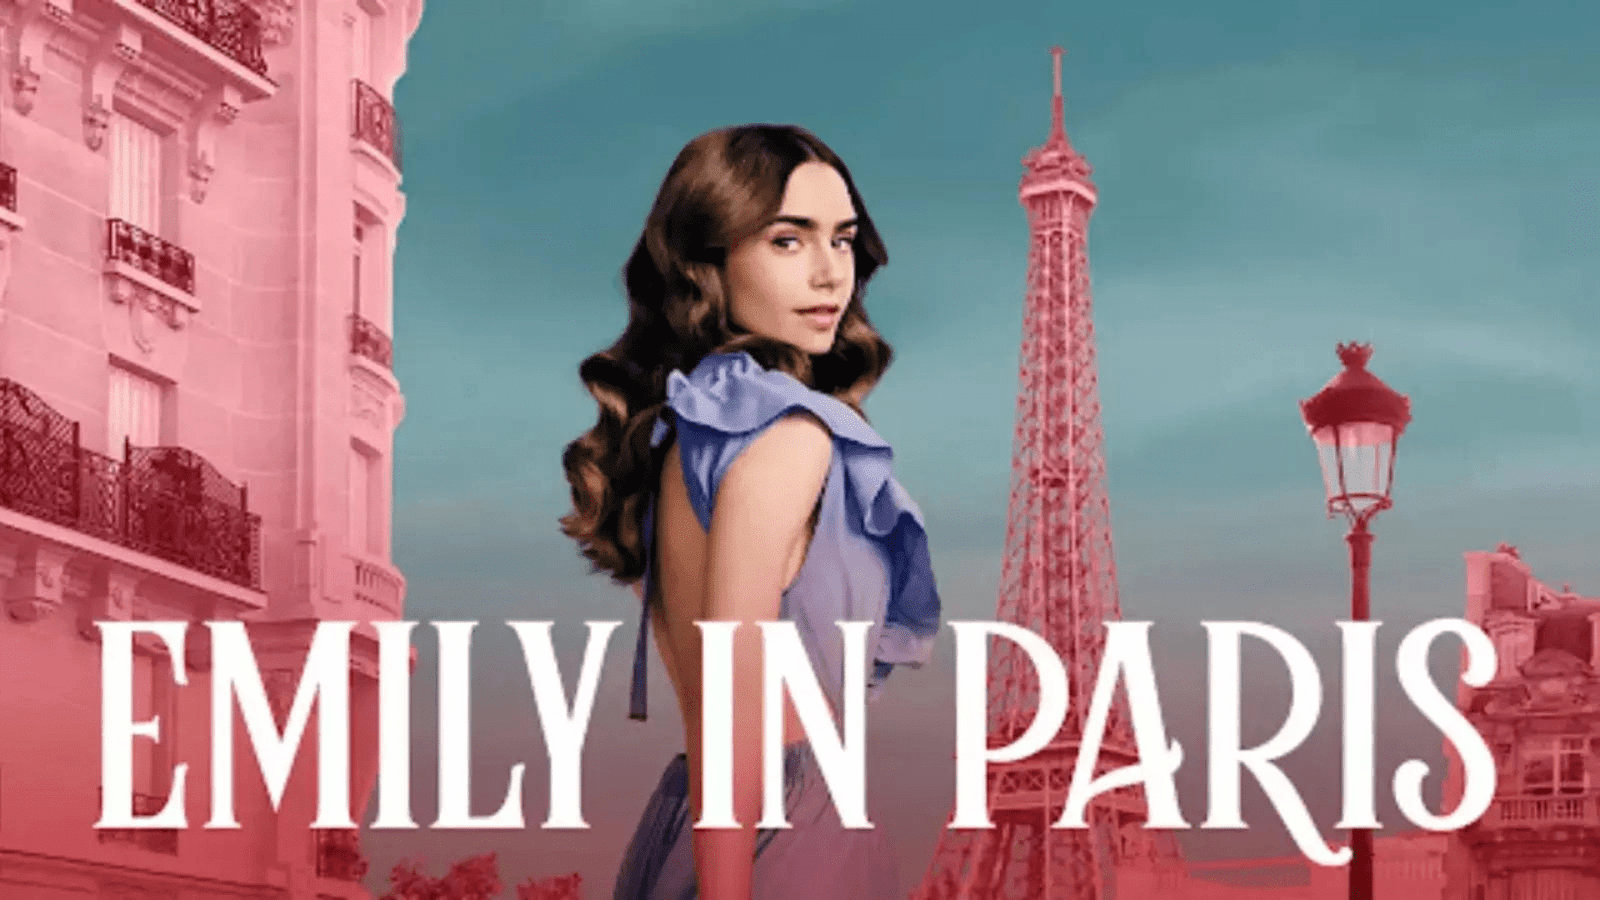 Emily in Paris season 4 to premiere in two parts this summer